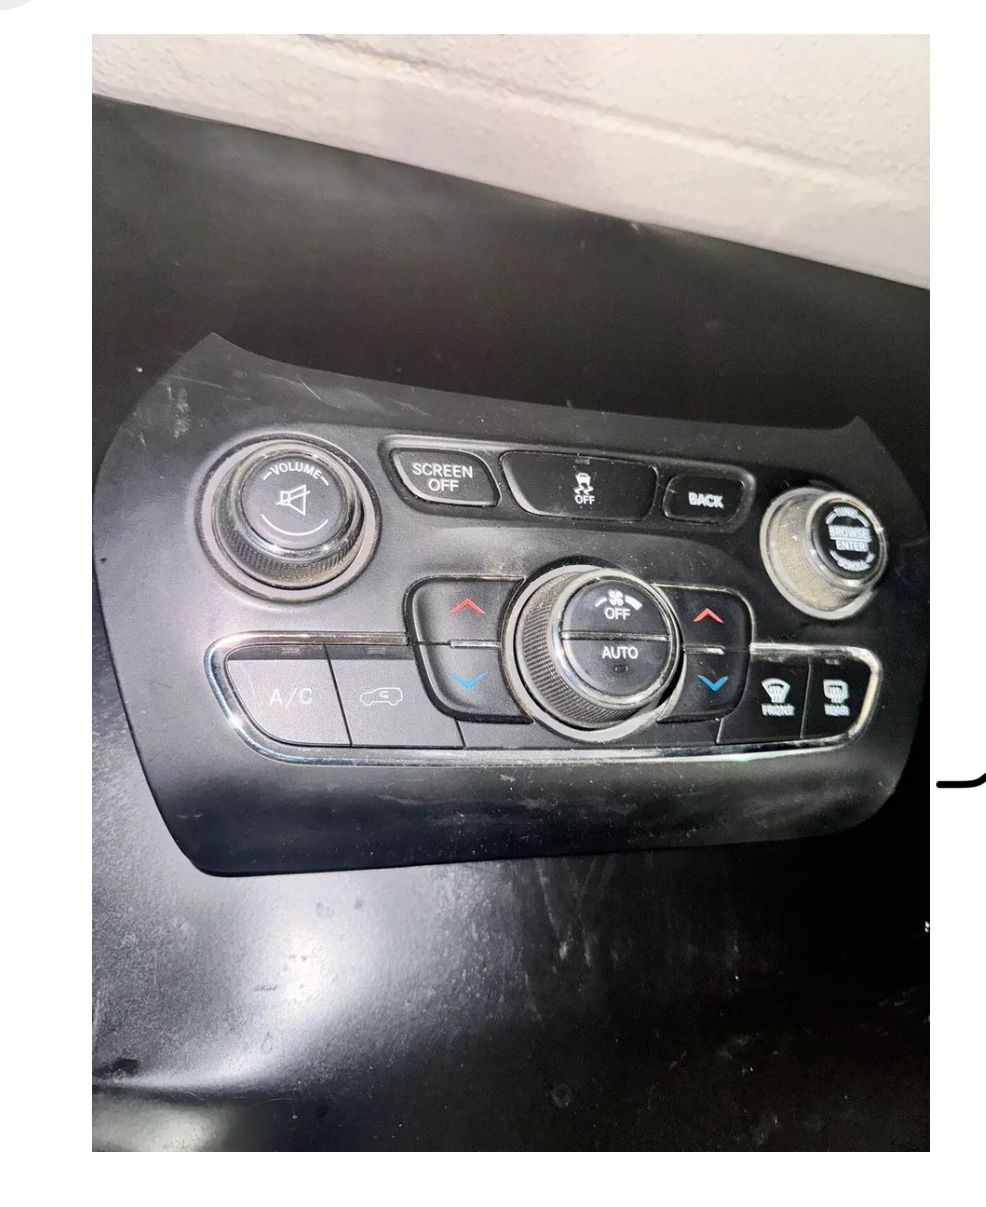 2014 Jeep Cherokee Ac Heater Climate Control Temperature Oem FHJYD